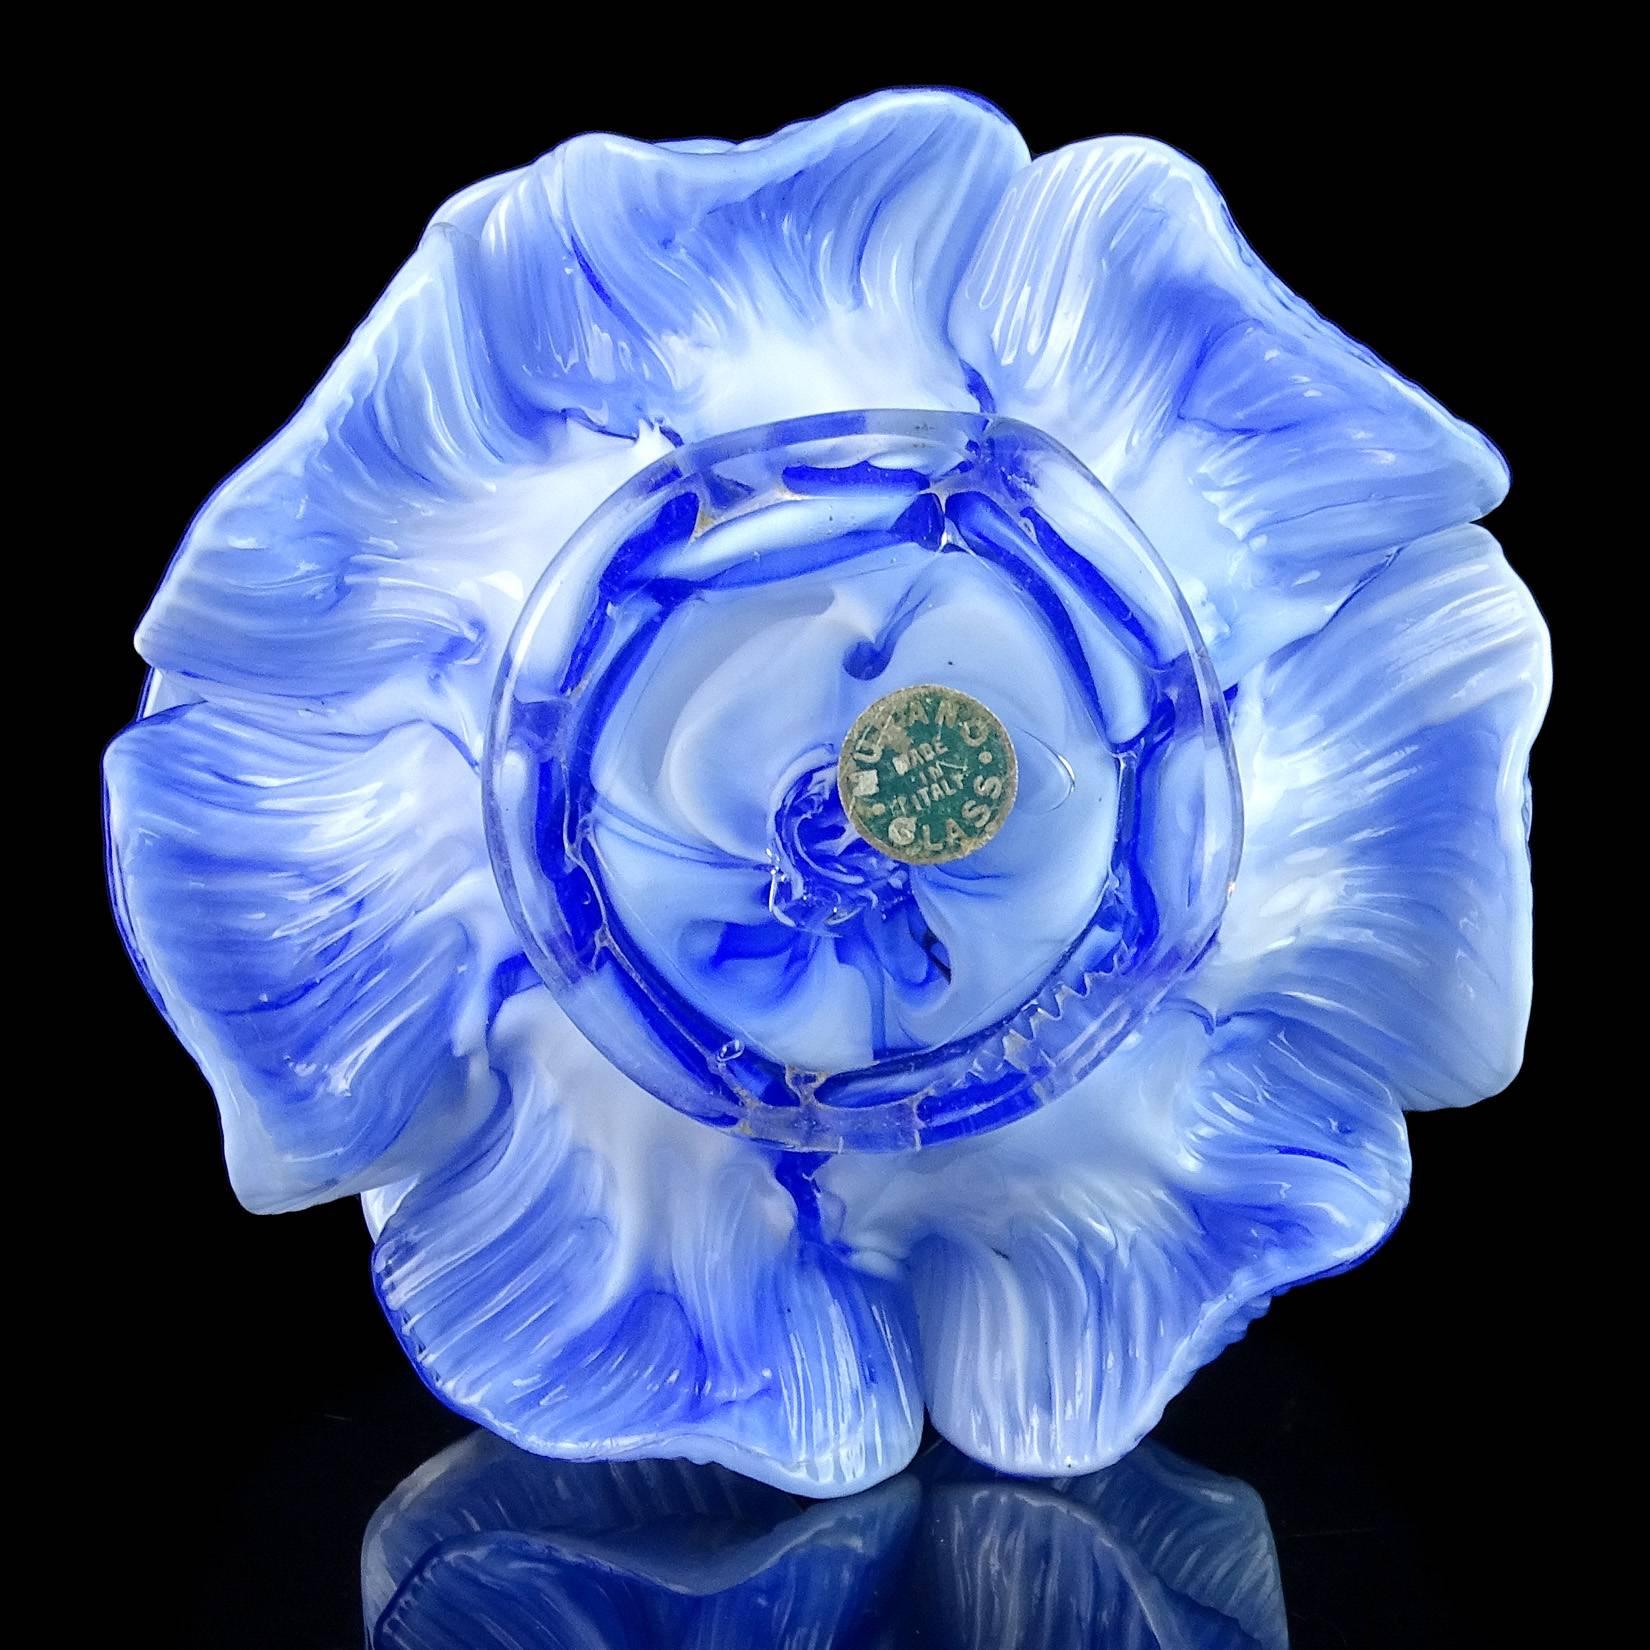 Hand-Crafted Toso Murano Blue White Mottled Double Petal Italian Art Glass Flower Bowls